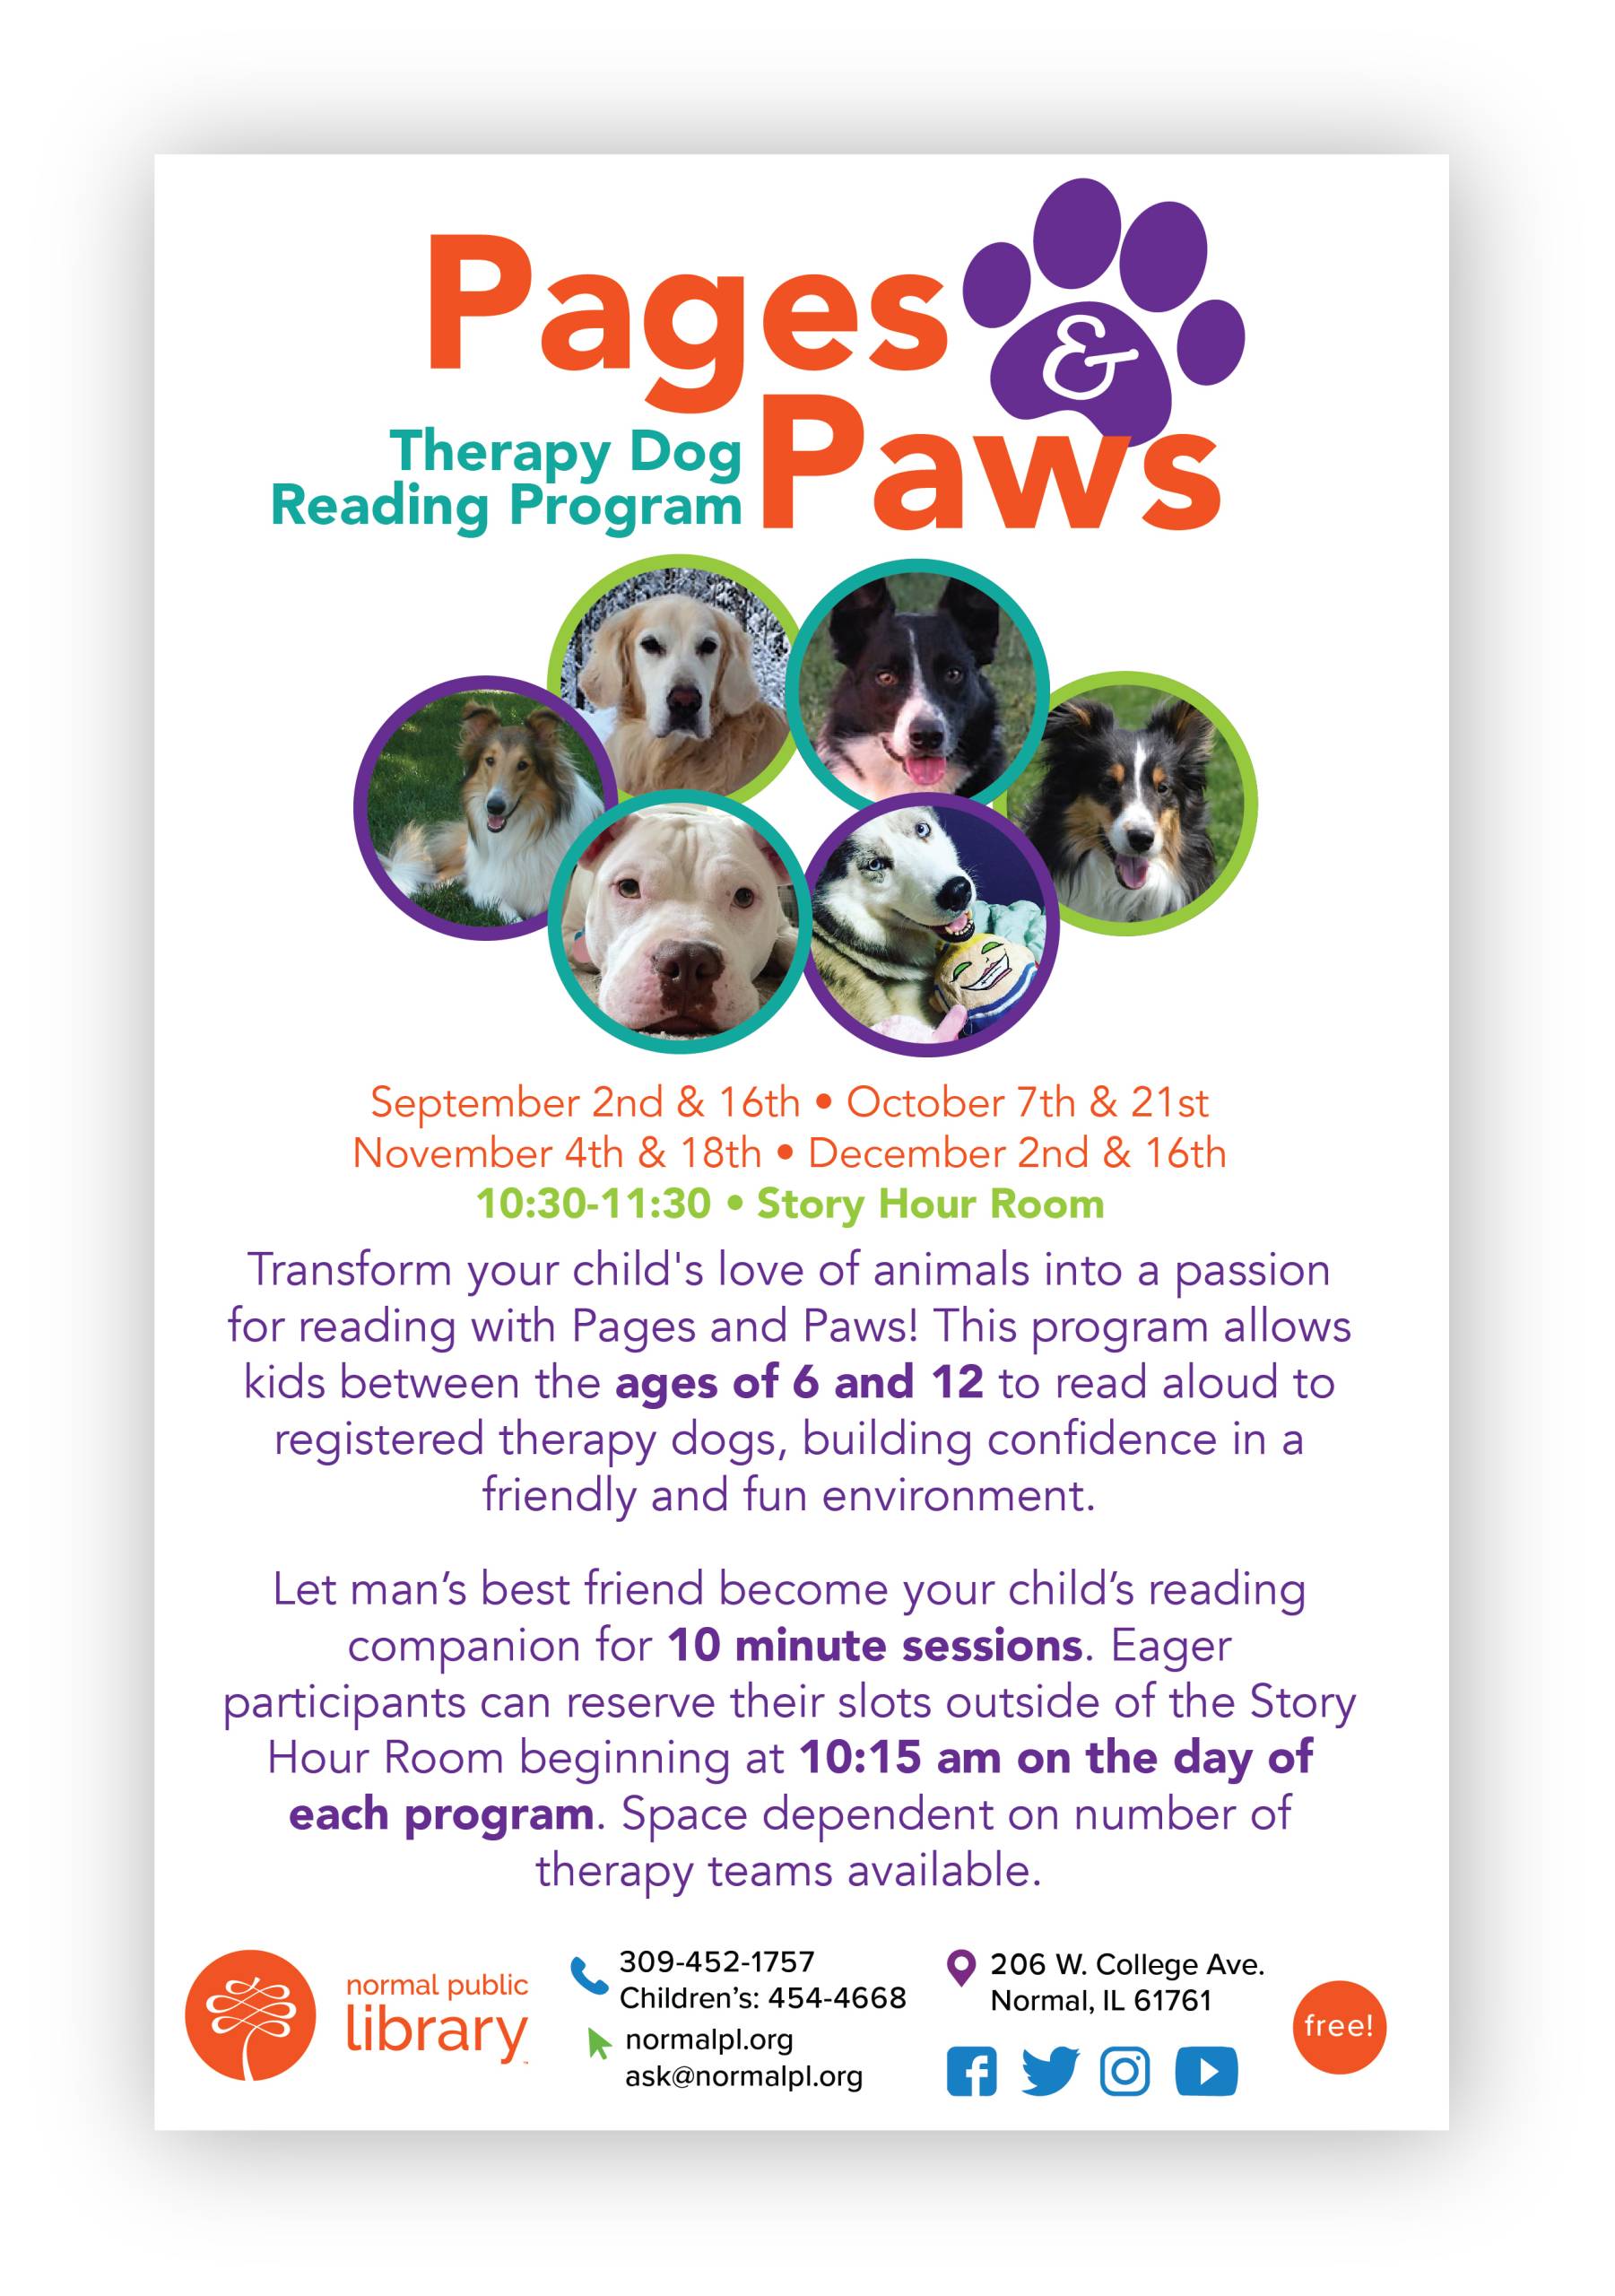 Pages and Paws: Therapy Dog Reading Program